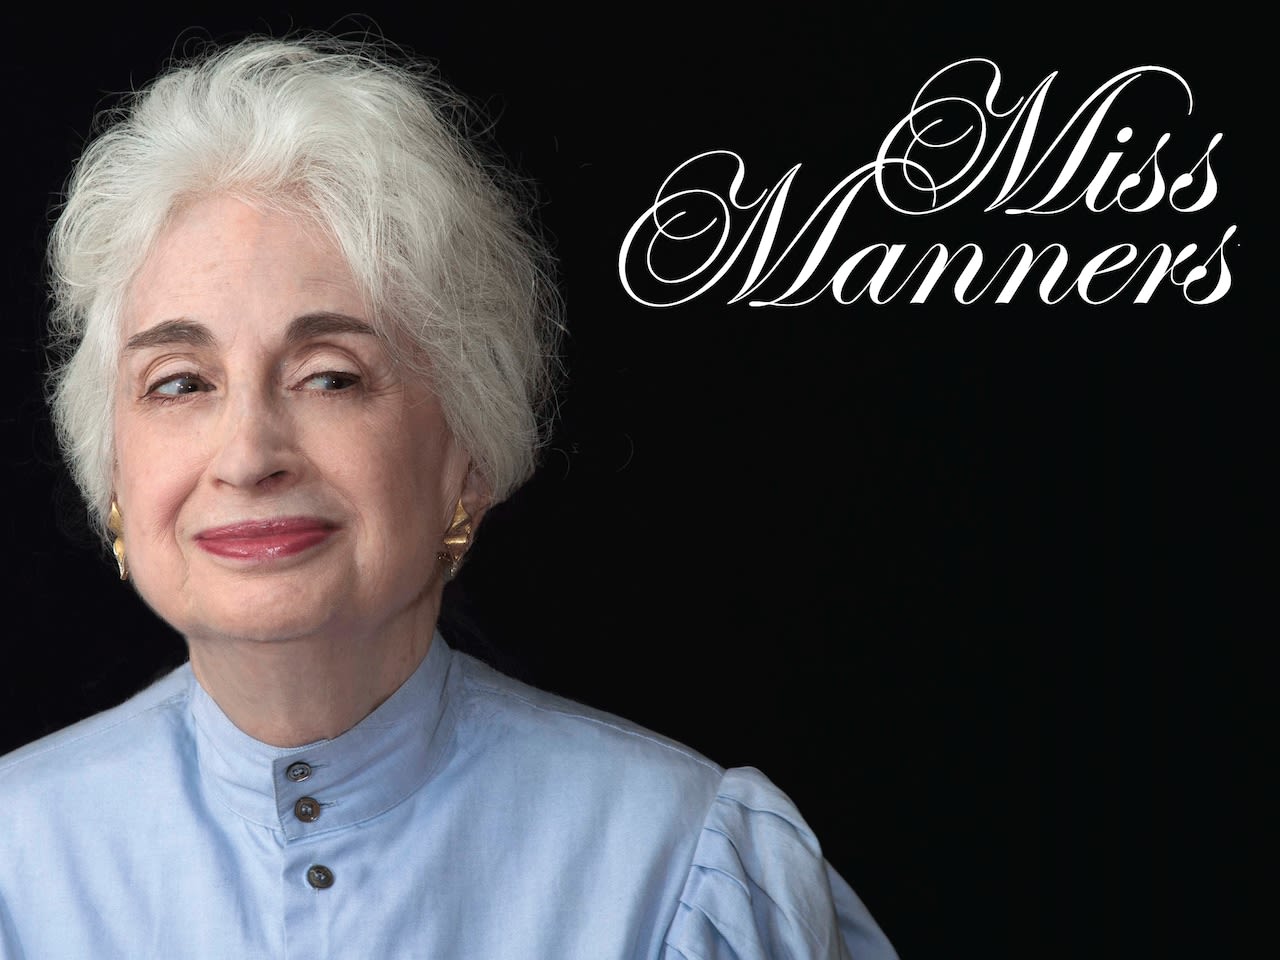 Miss Manners: How can I tell if something is meant as a gift, or requires reimbursement?